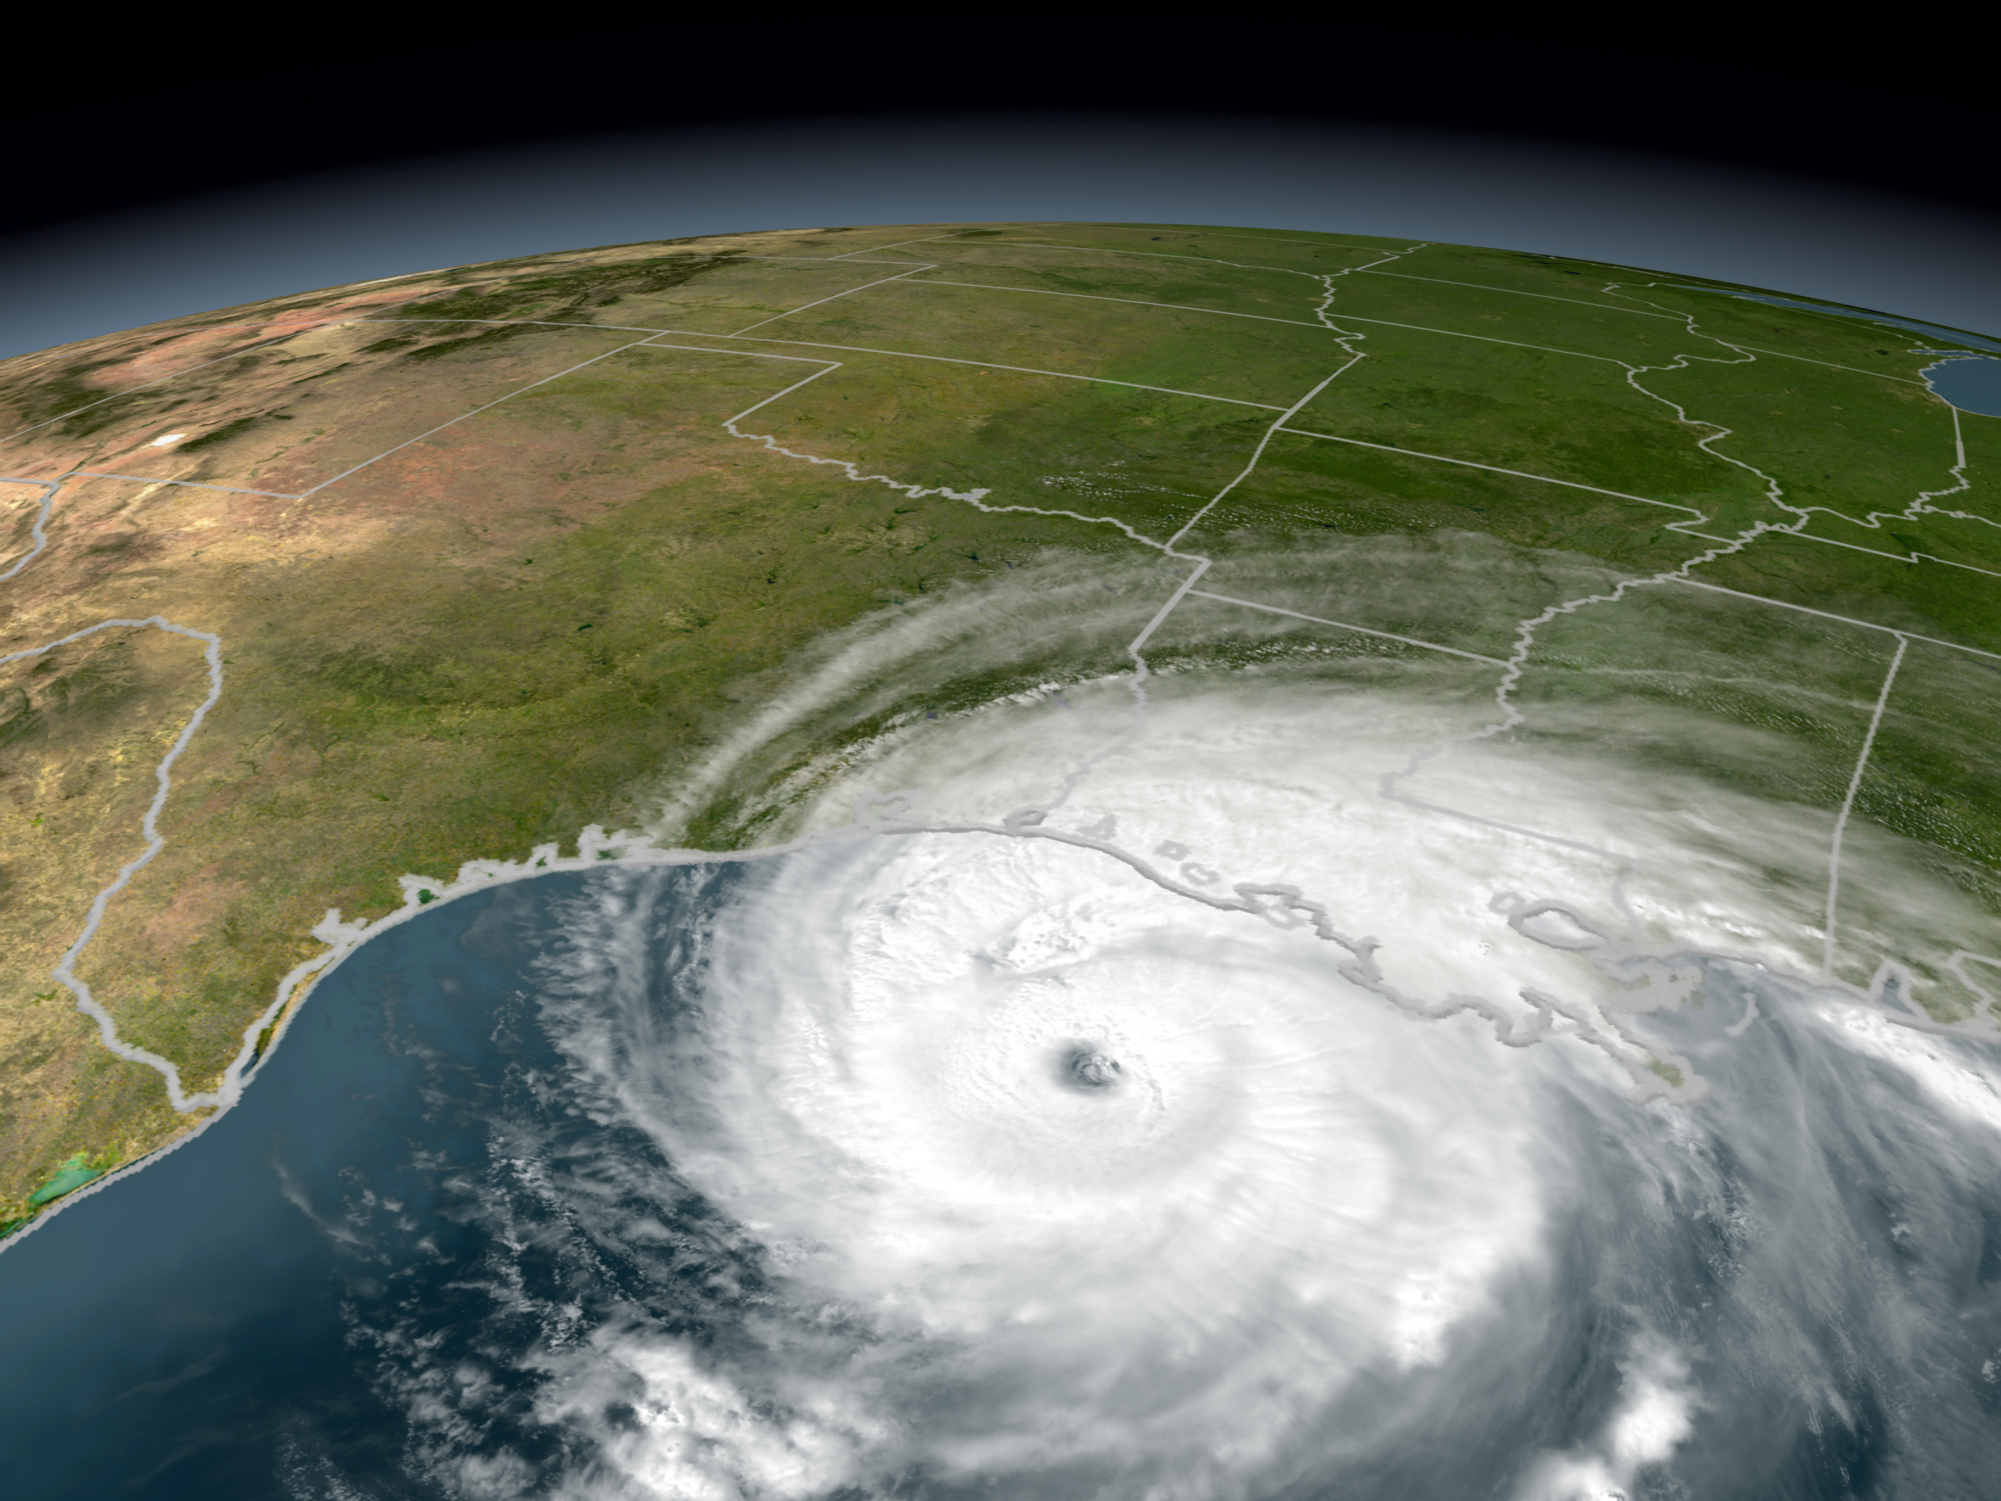 A Category 5 Texas Hurricane Where landfall would be worst